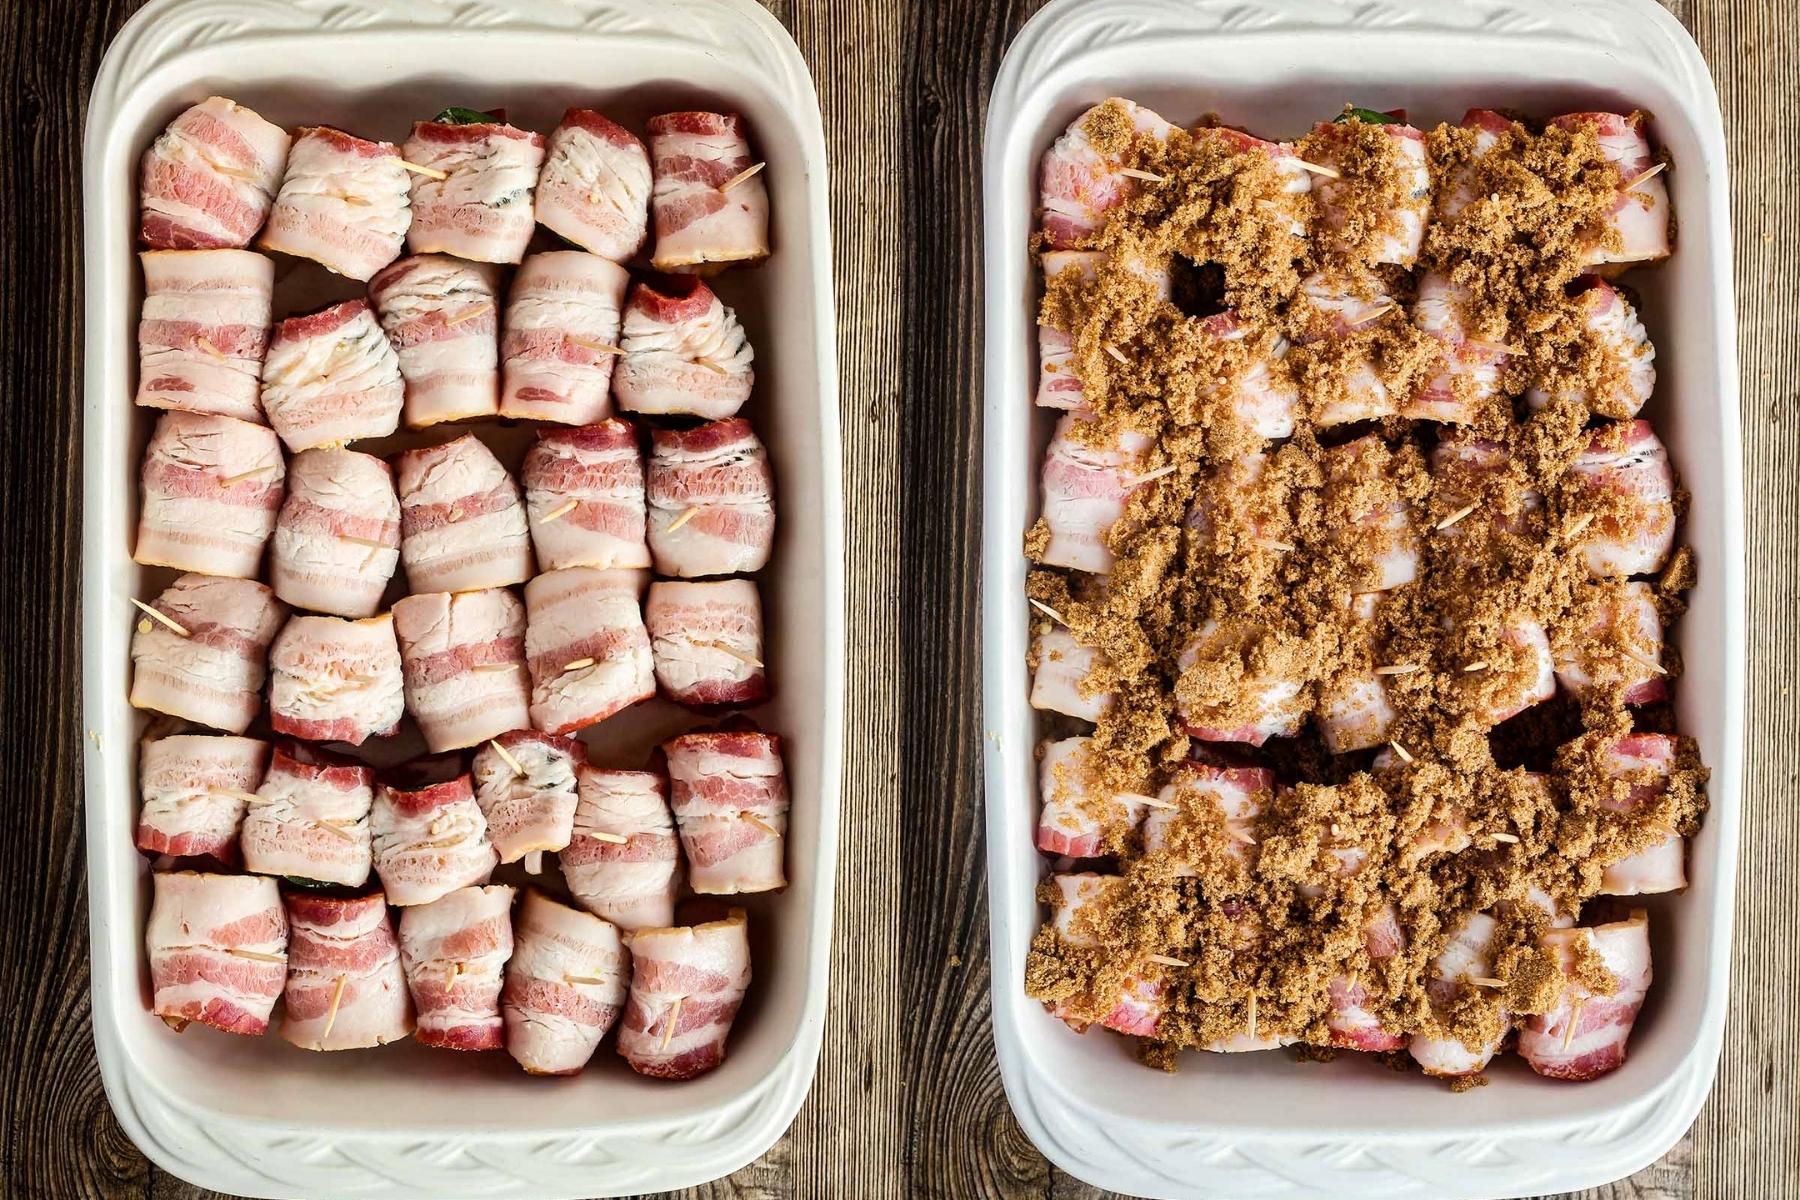 Jalapeno poppers wrapped in bacon in a baking dish before and after addition of brown sugar.